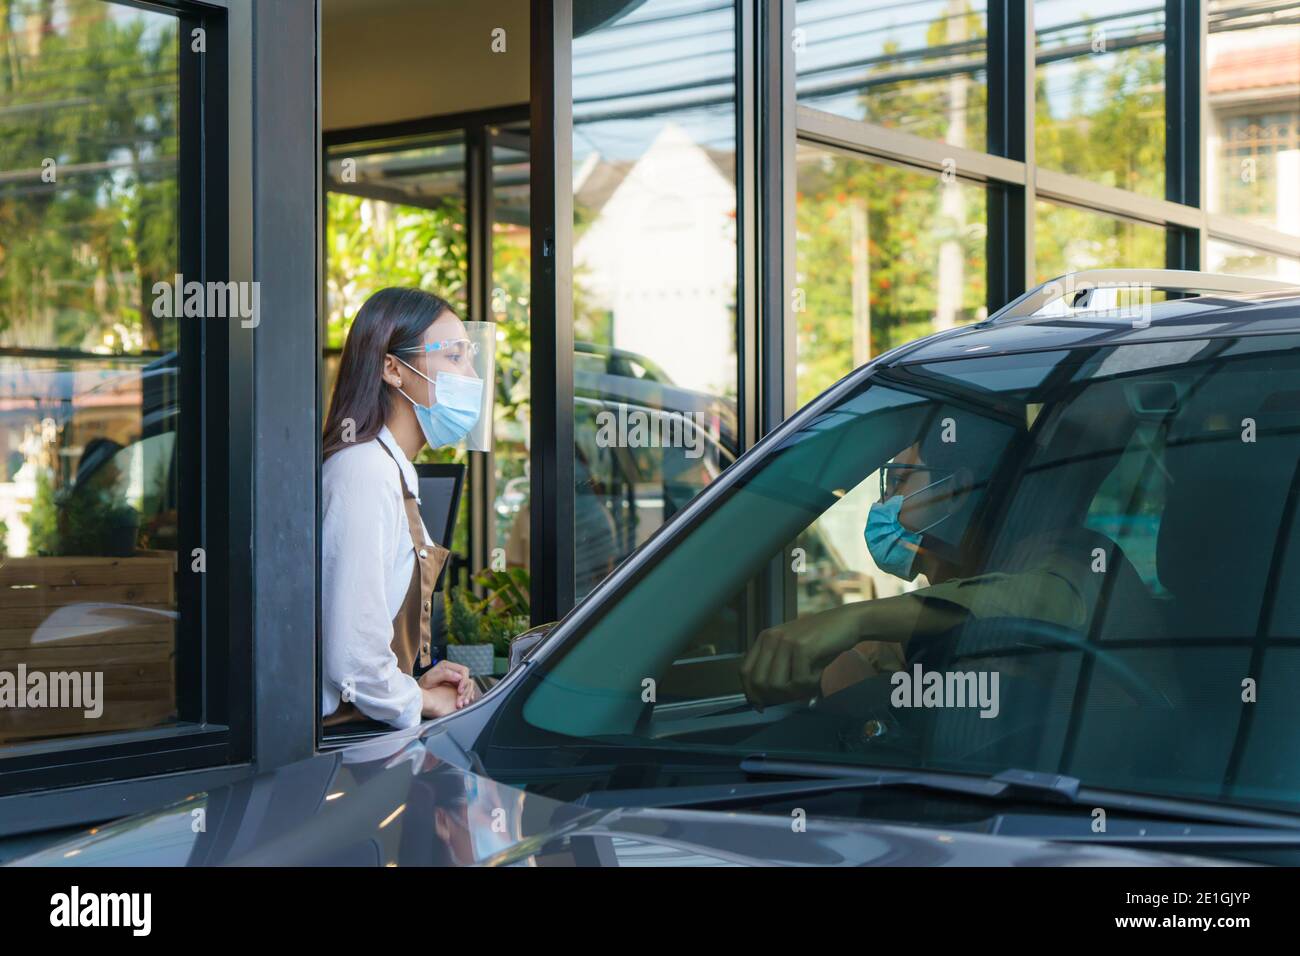 Asian man in protective mask order food and coffee with woman waitress wearing face mask and face shield at drive thru during coronavirus outbreak. Stock Photo